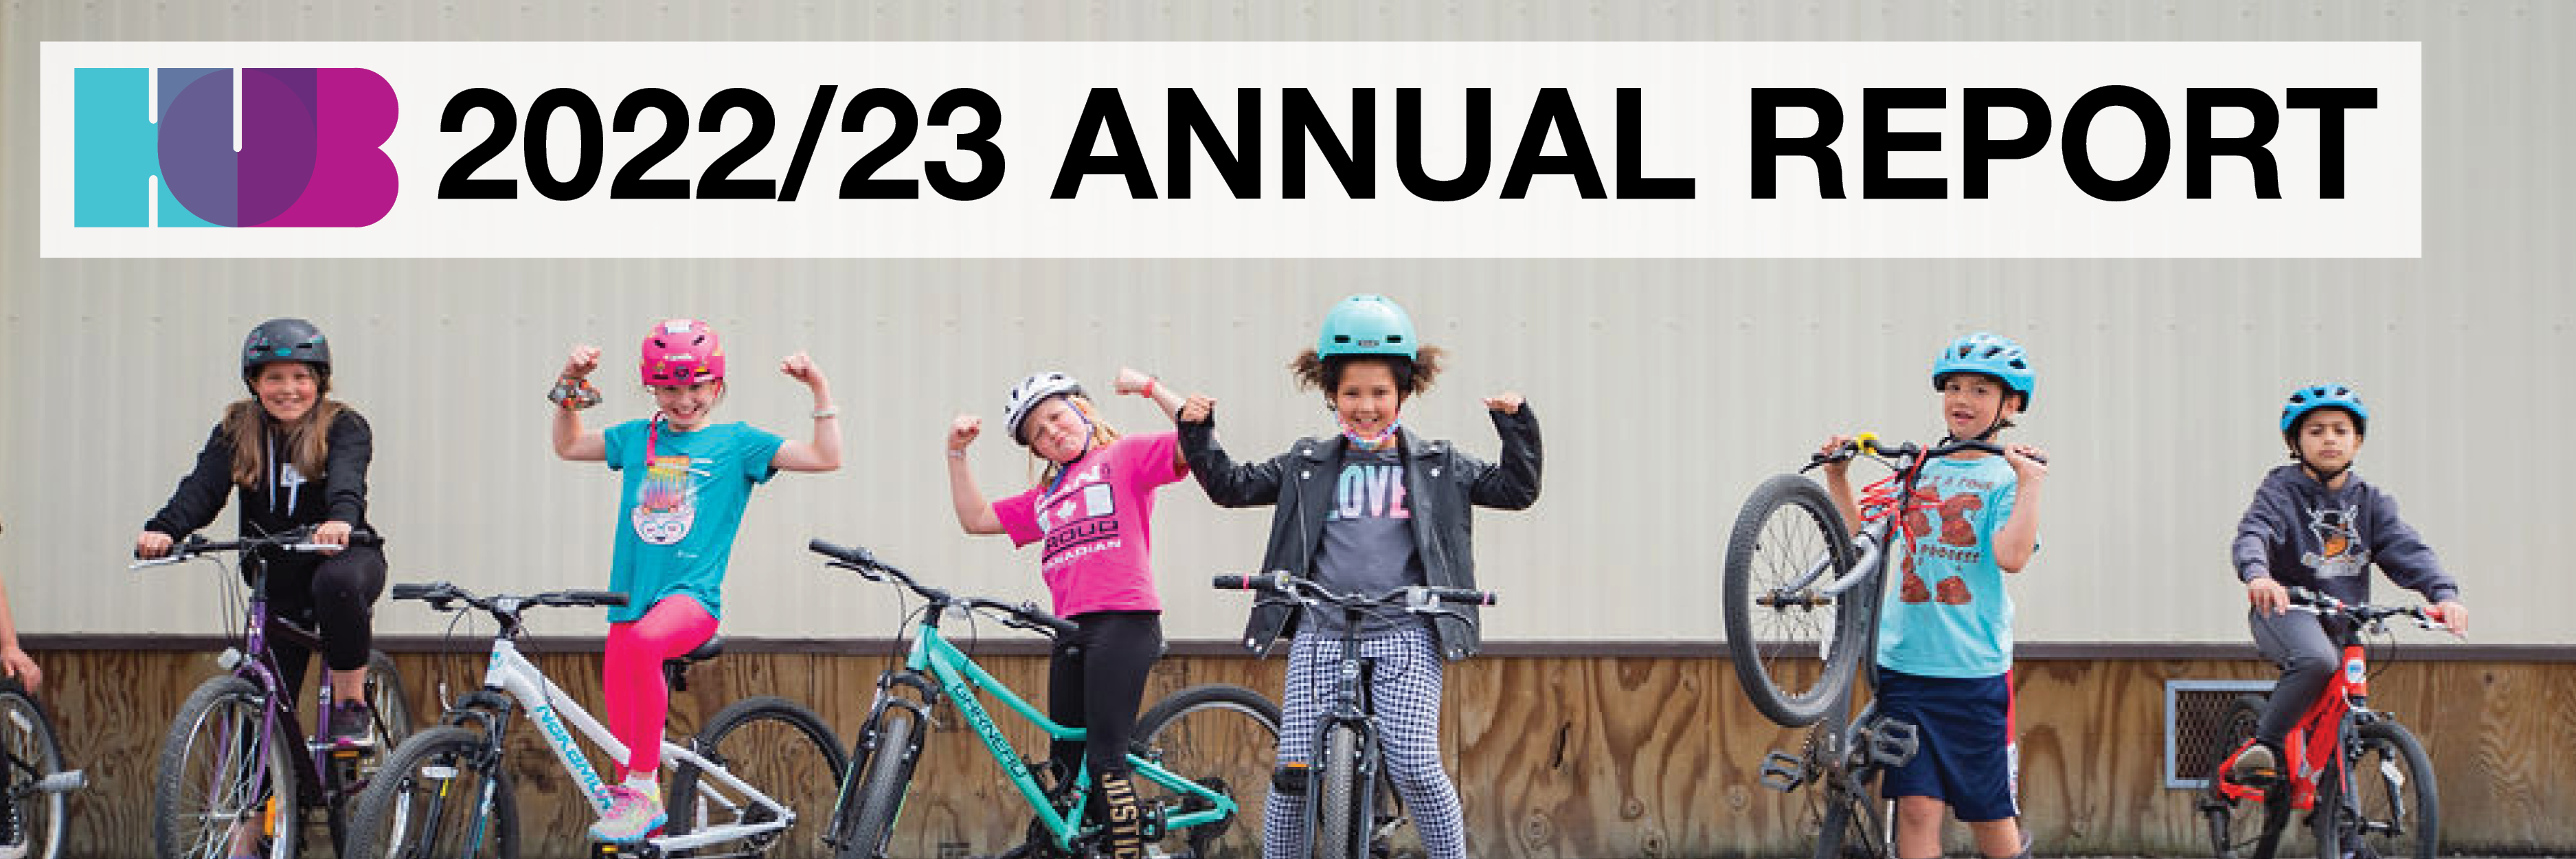 2022/23 Annual Report. A group of Grade 4/5 students stand in a row with their bikes on school grounds.